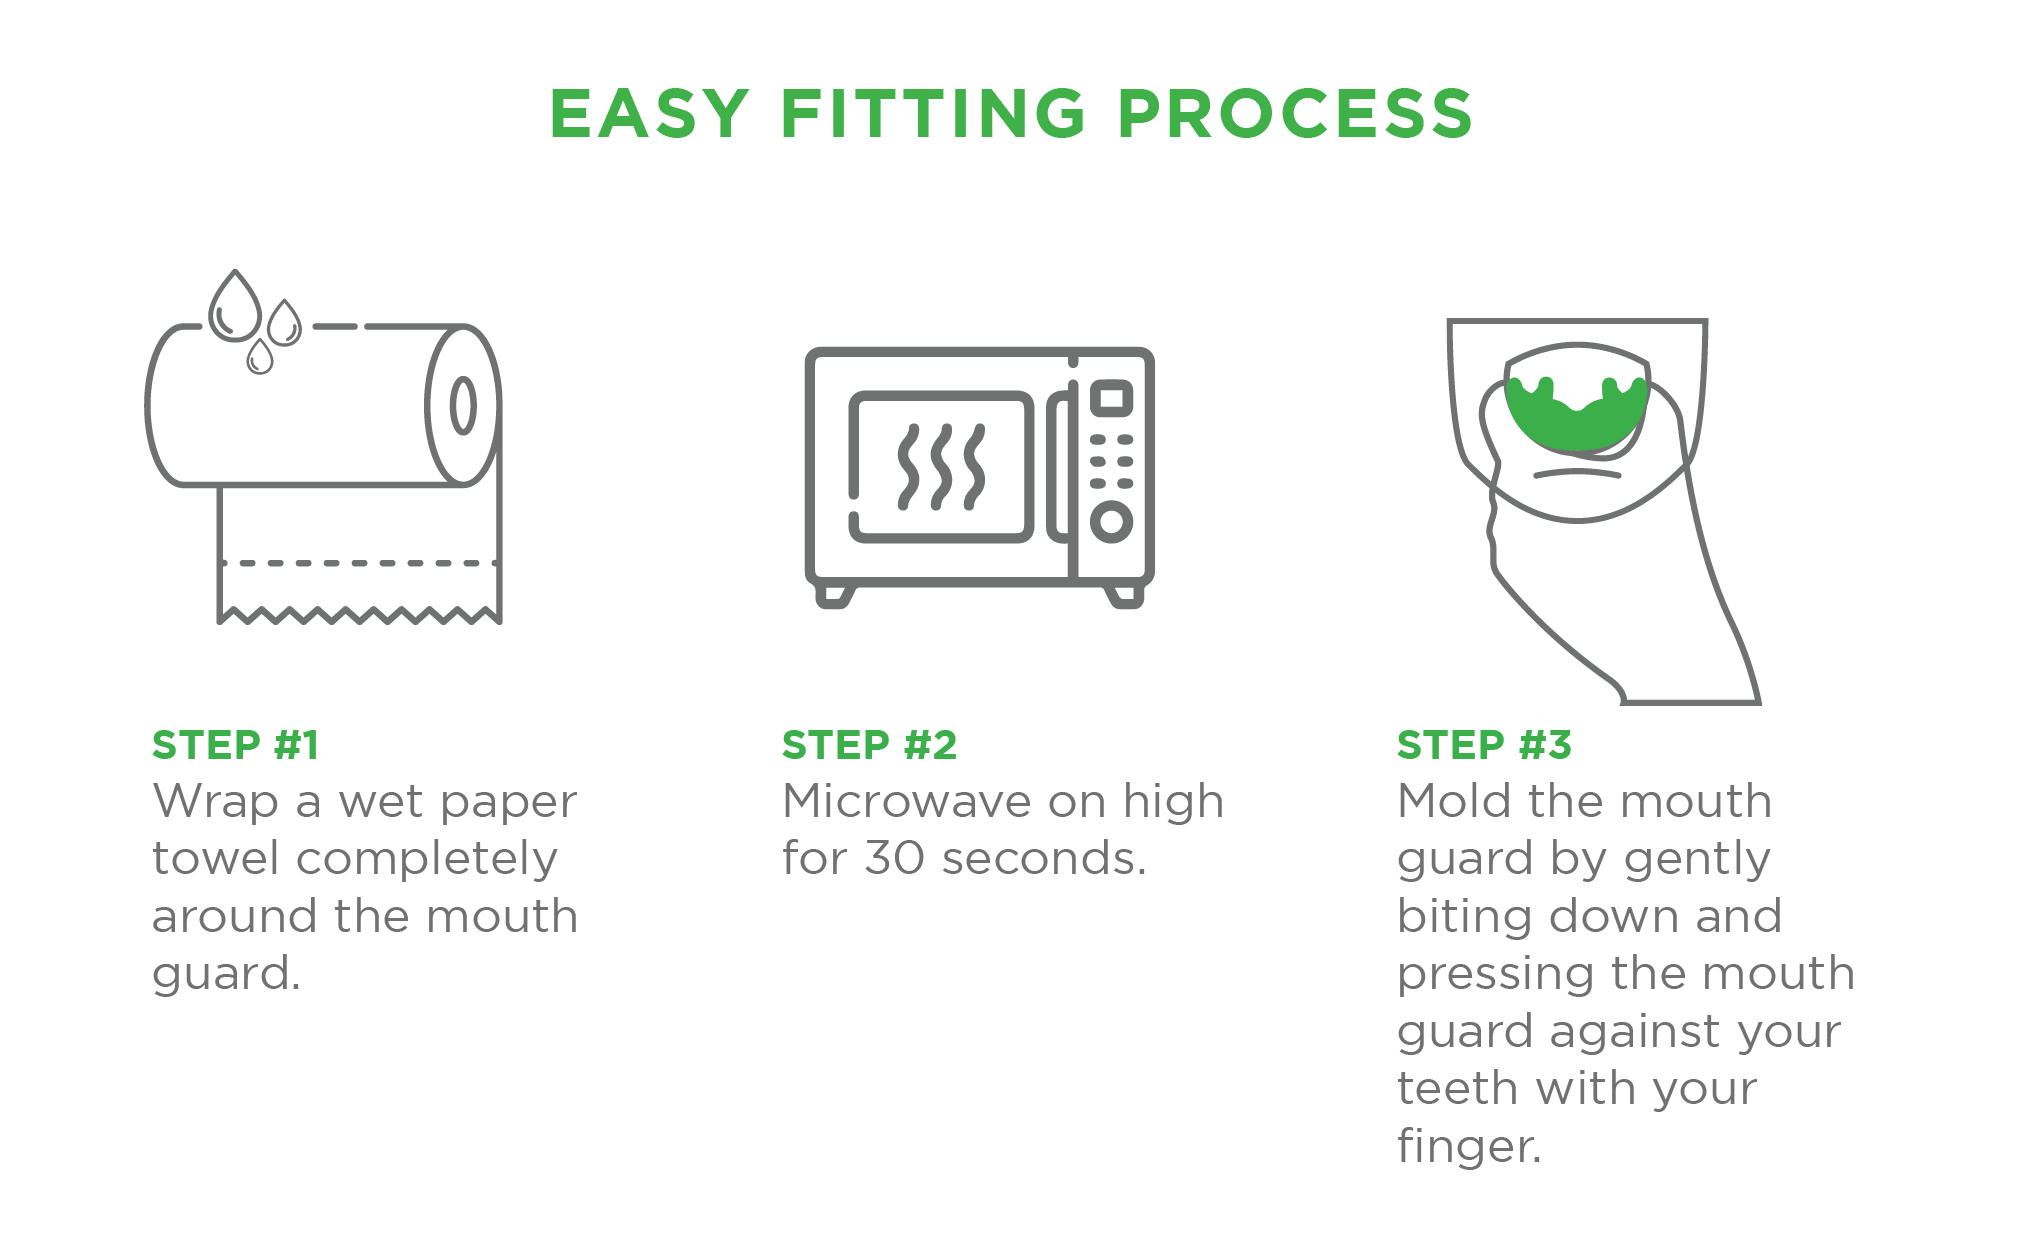 Step #1 wrap a wet paper towel completely around the mouth guard. Step #2 microwave on high for 30 seconds. Step #3 mold the mouth guard by gently biting down and pressing the mouth guard against your teeth with your finger.